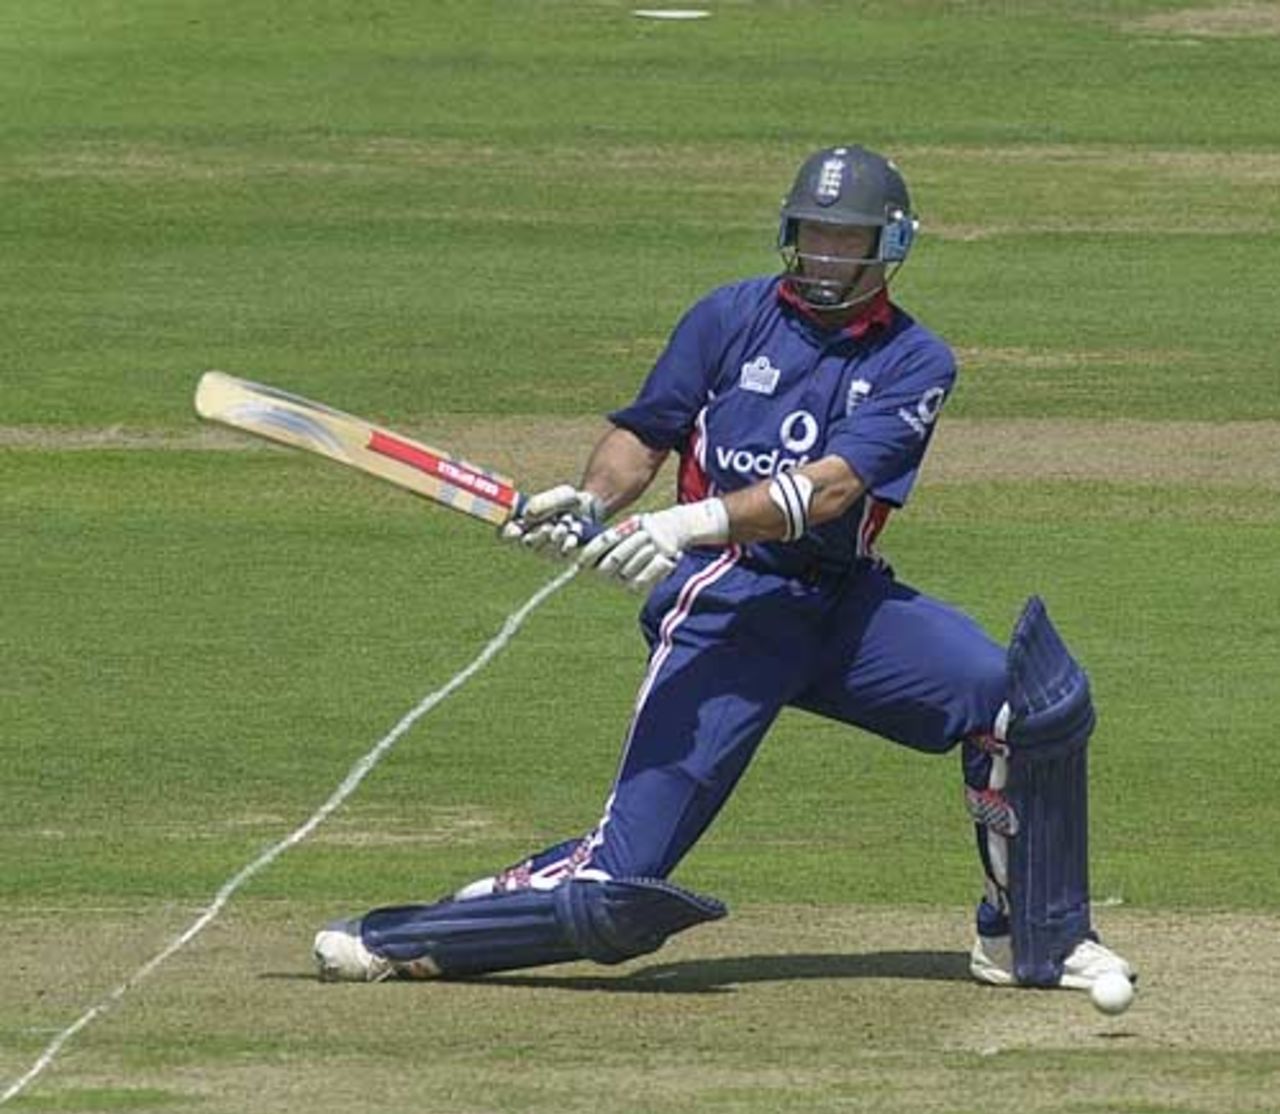 Hussain sweeps on his way to a century, NatWest Series Final, 13th July 2002